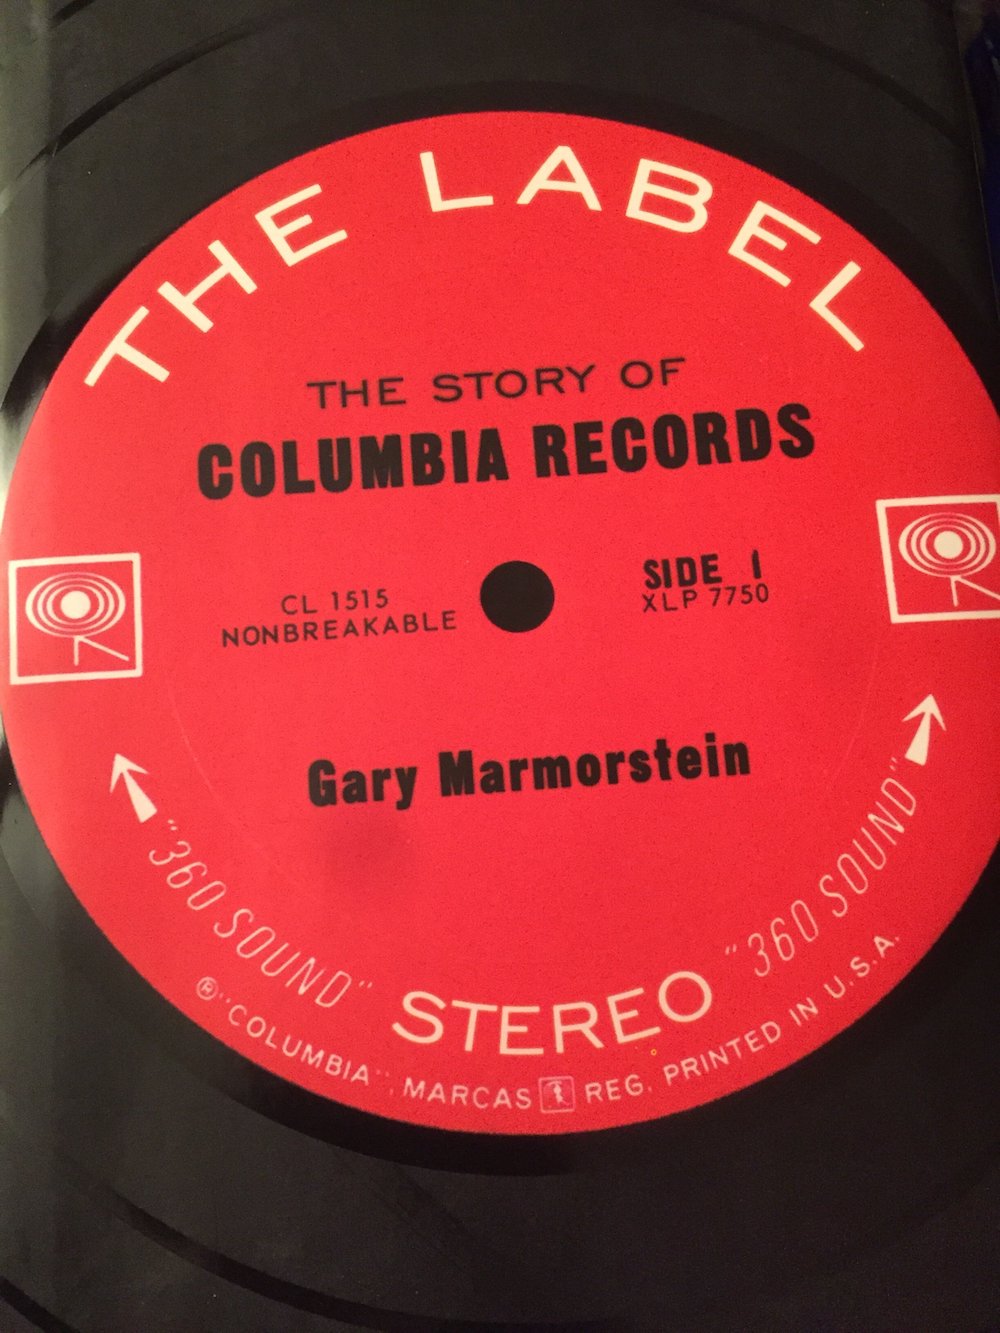 The Story of Columbia Records